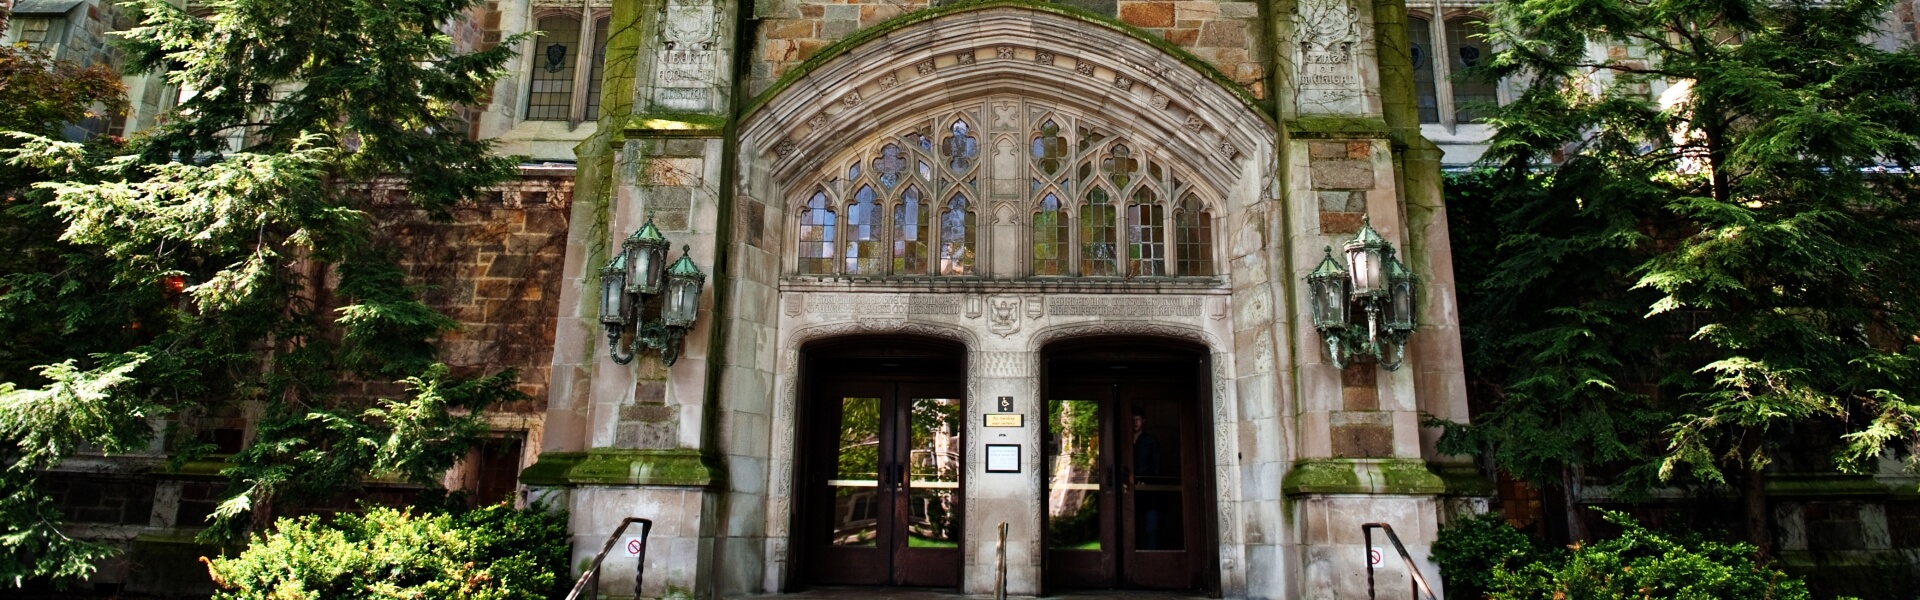 Exterior view of the Reading Room Entrance from the Law Quad during Summer beauty